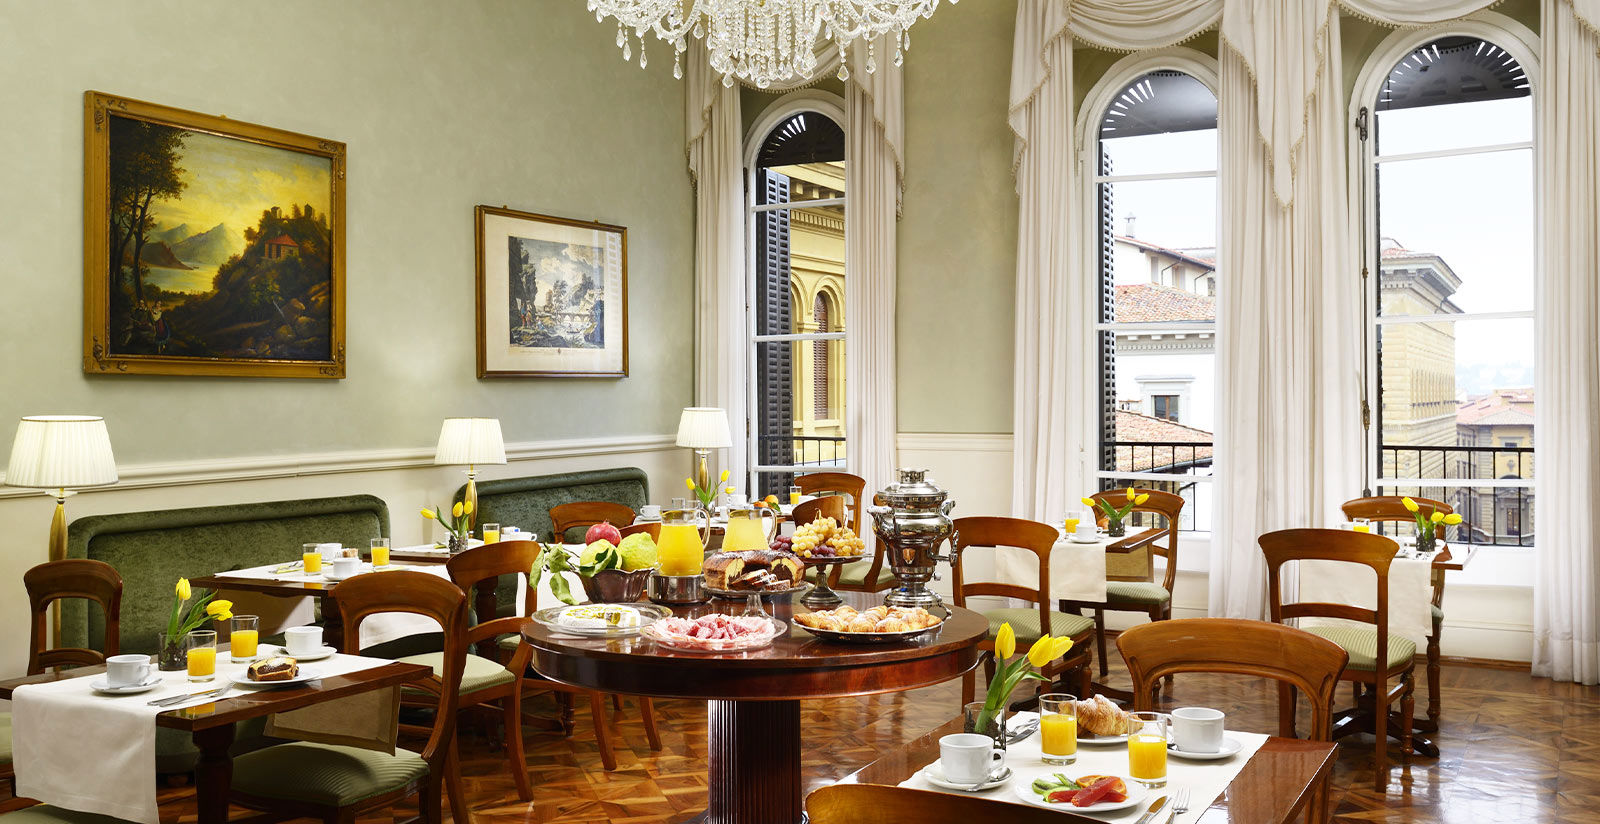 STAY IN FLORENCE AT PENDINI HOTEL, BREKFAST IS INCLUDED! 4